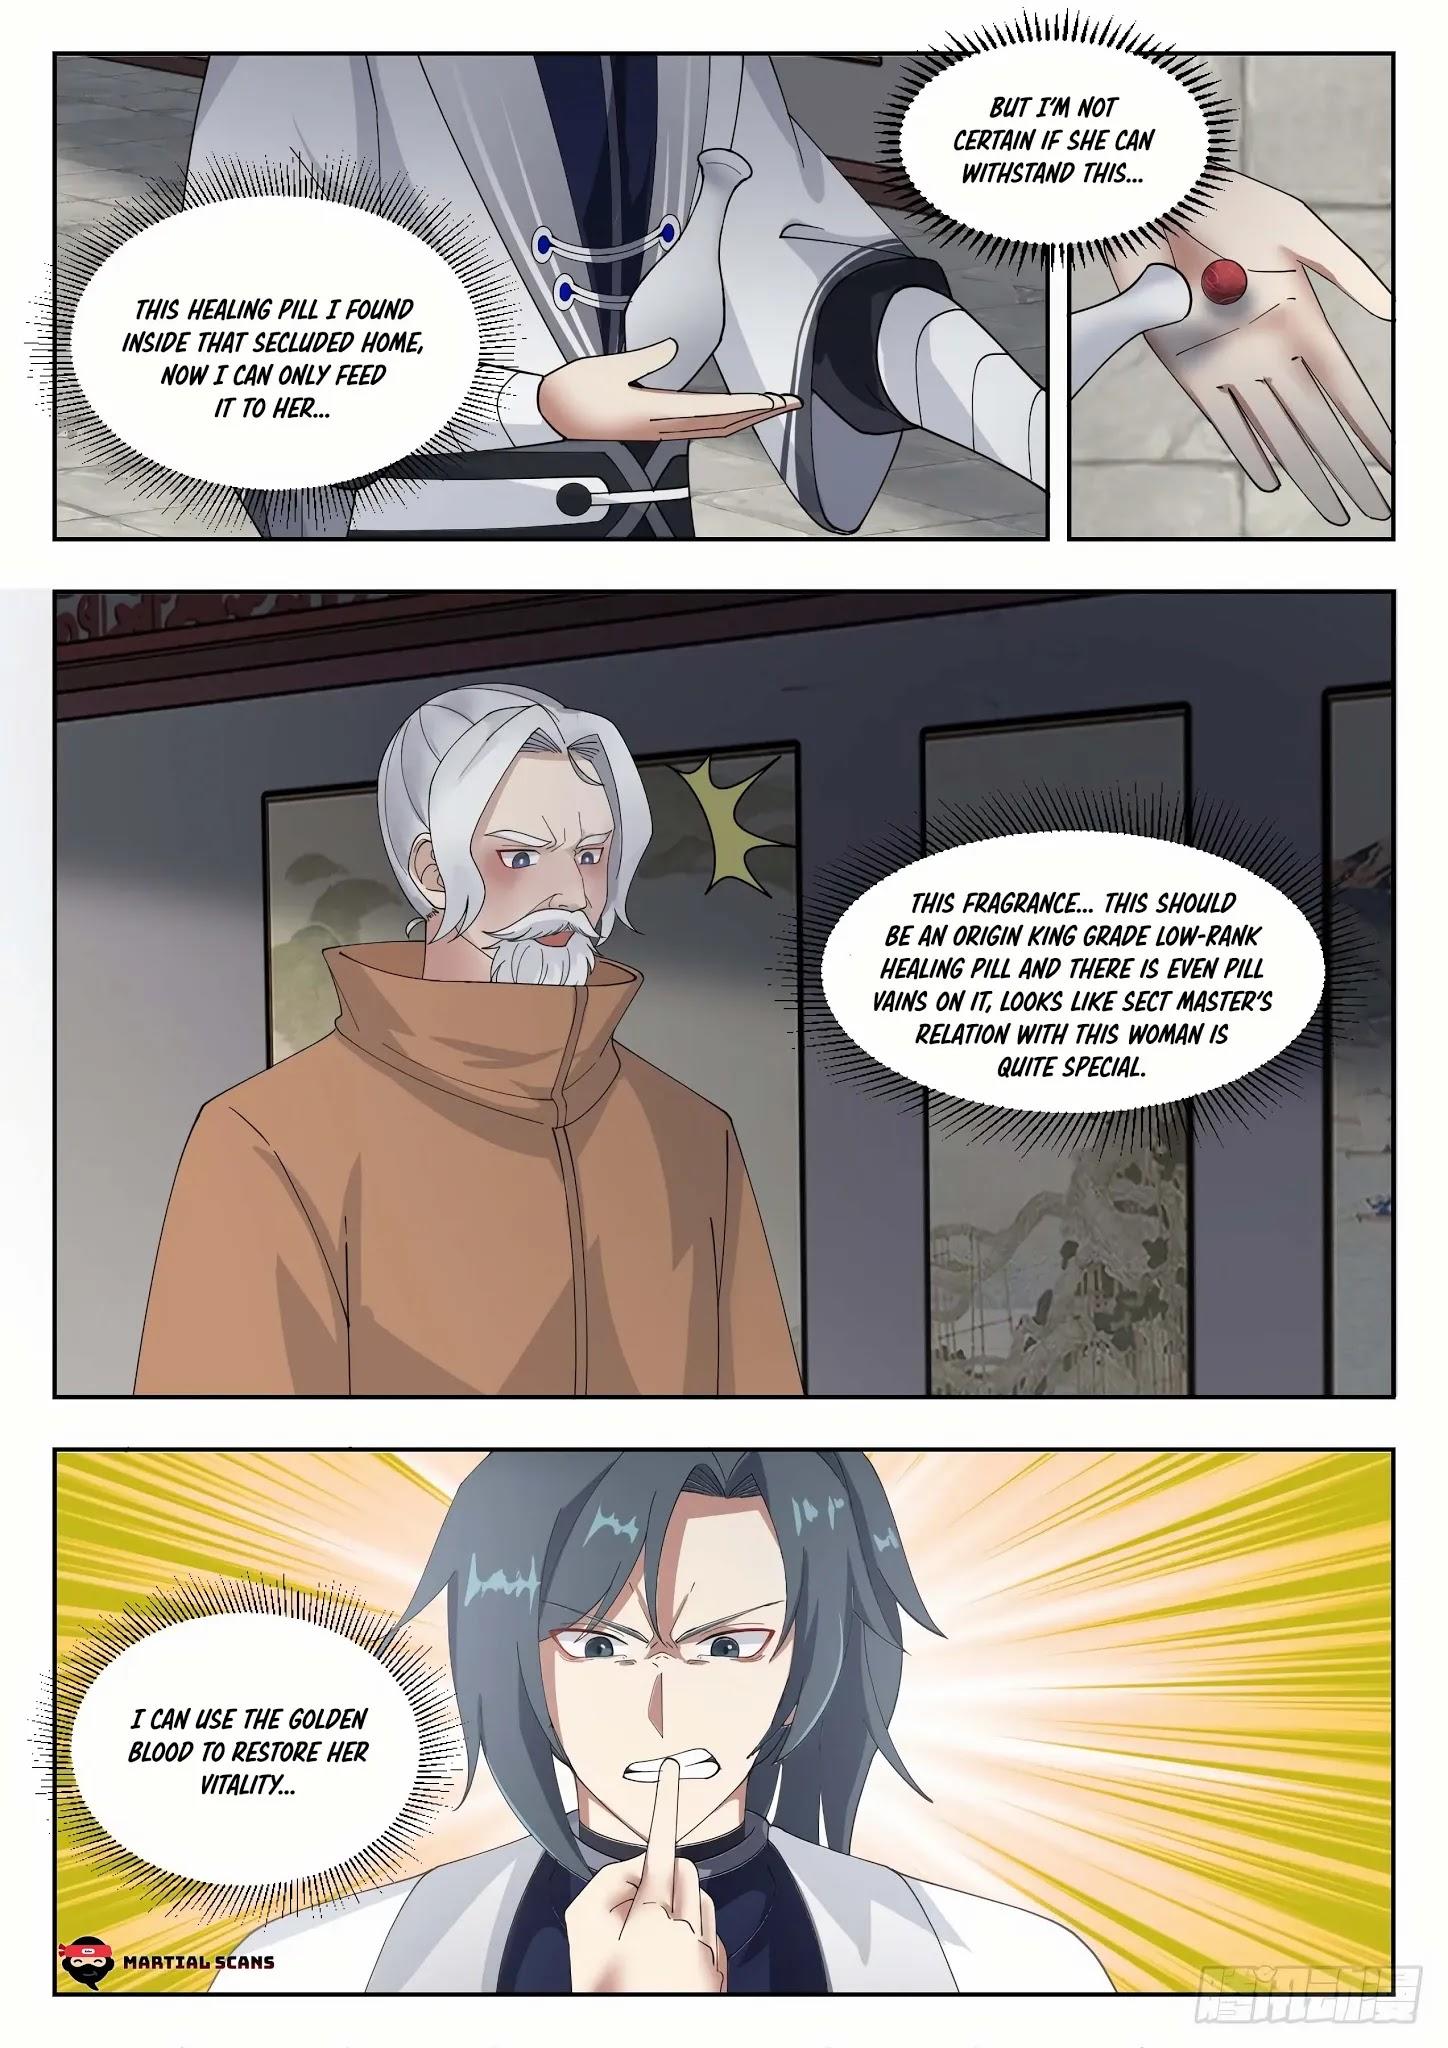 Read Martial Peak Chapter 1318: Shan Qing Luo'S Experience - Manganelo